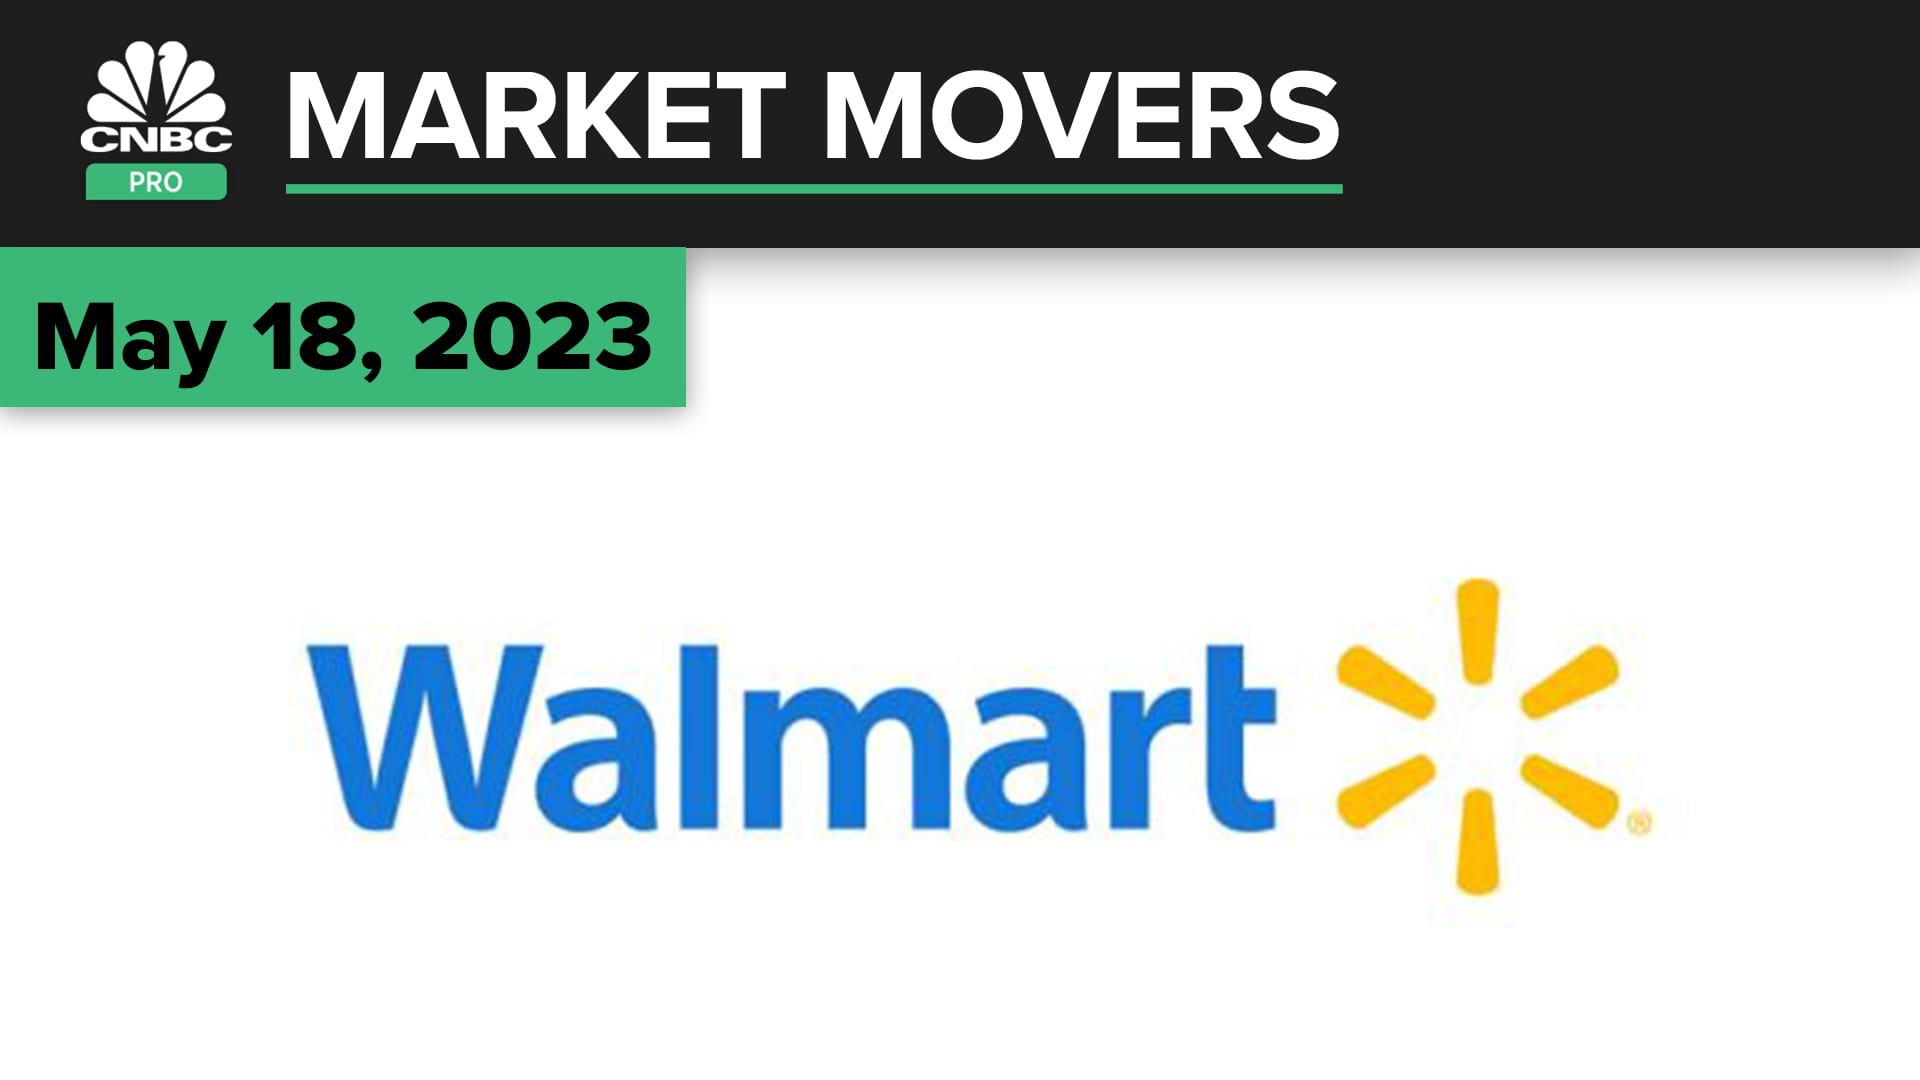 Walmart shares edge higher on higher full-year guidance. Here's how to play the stock